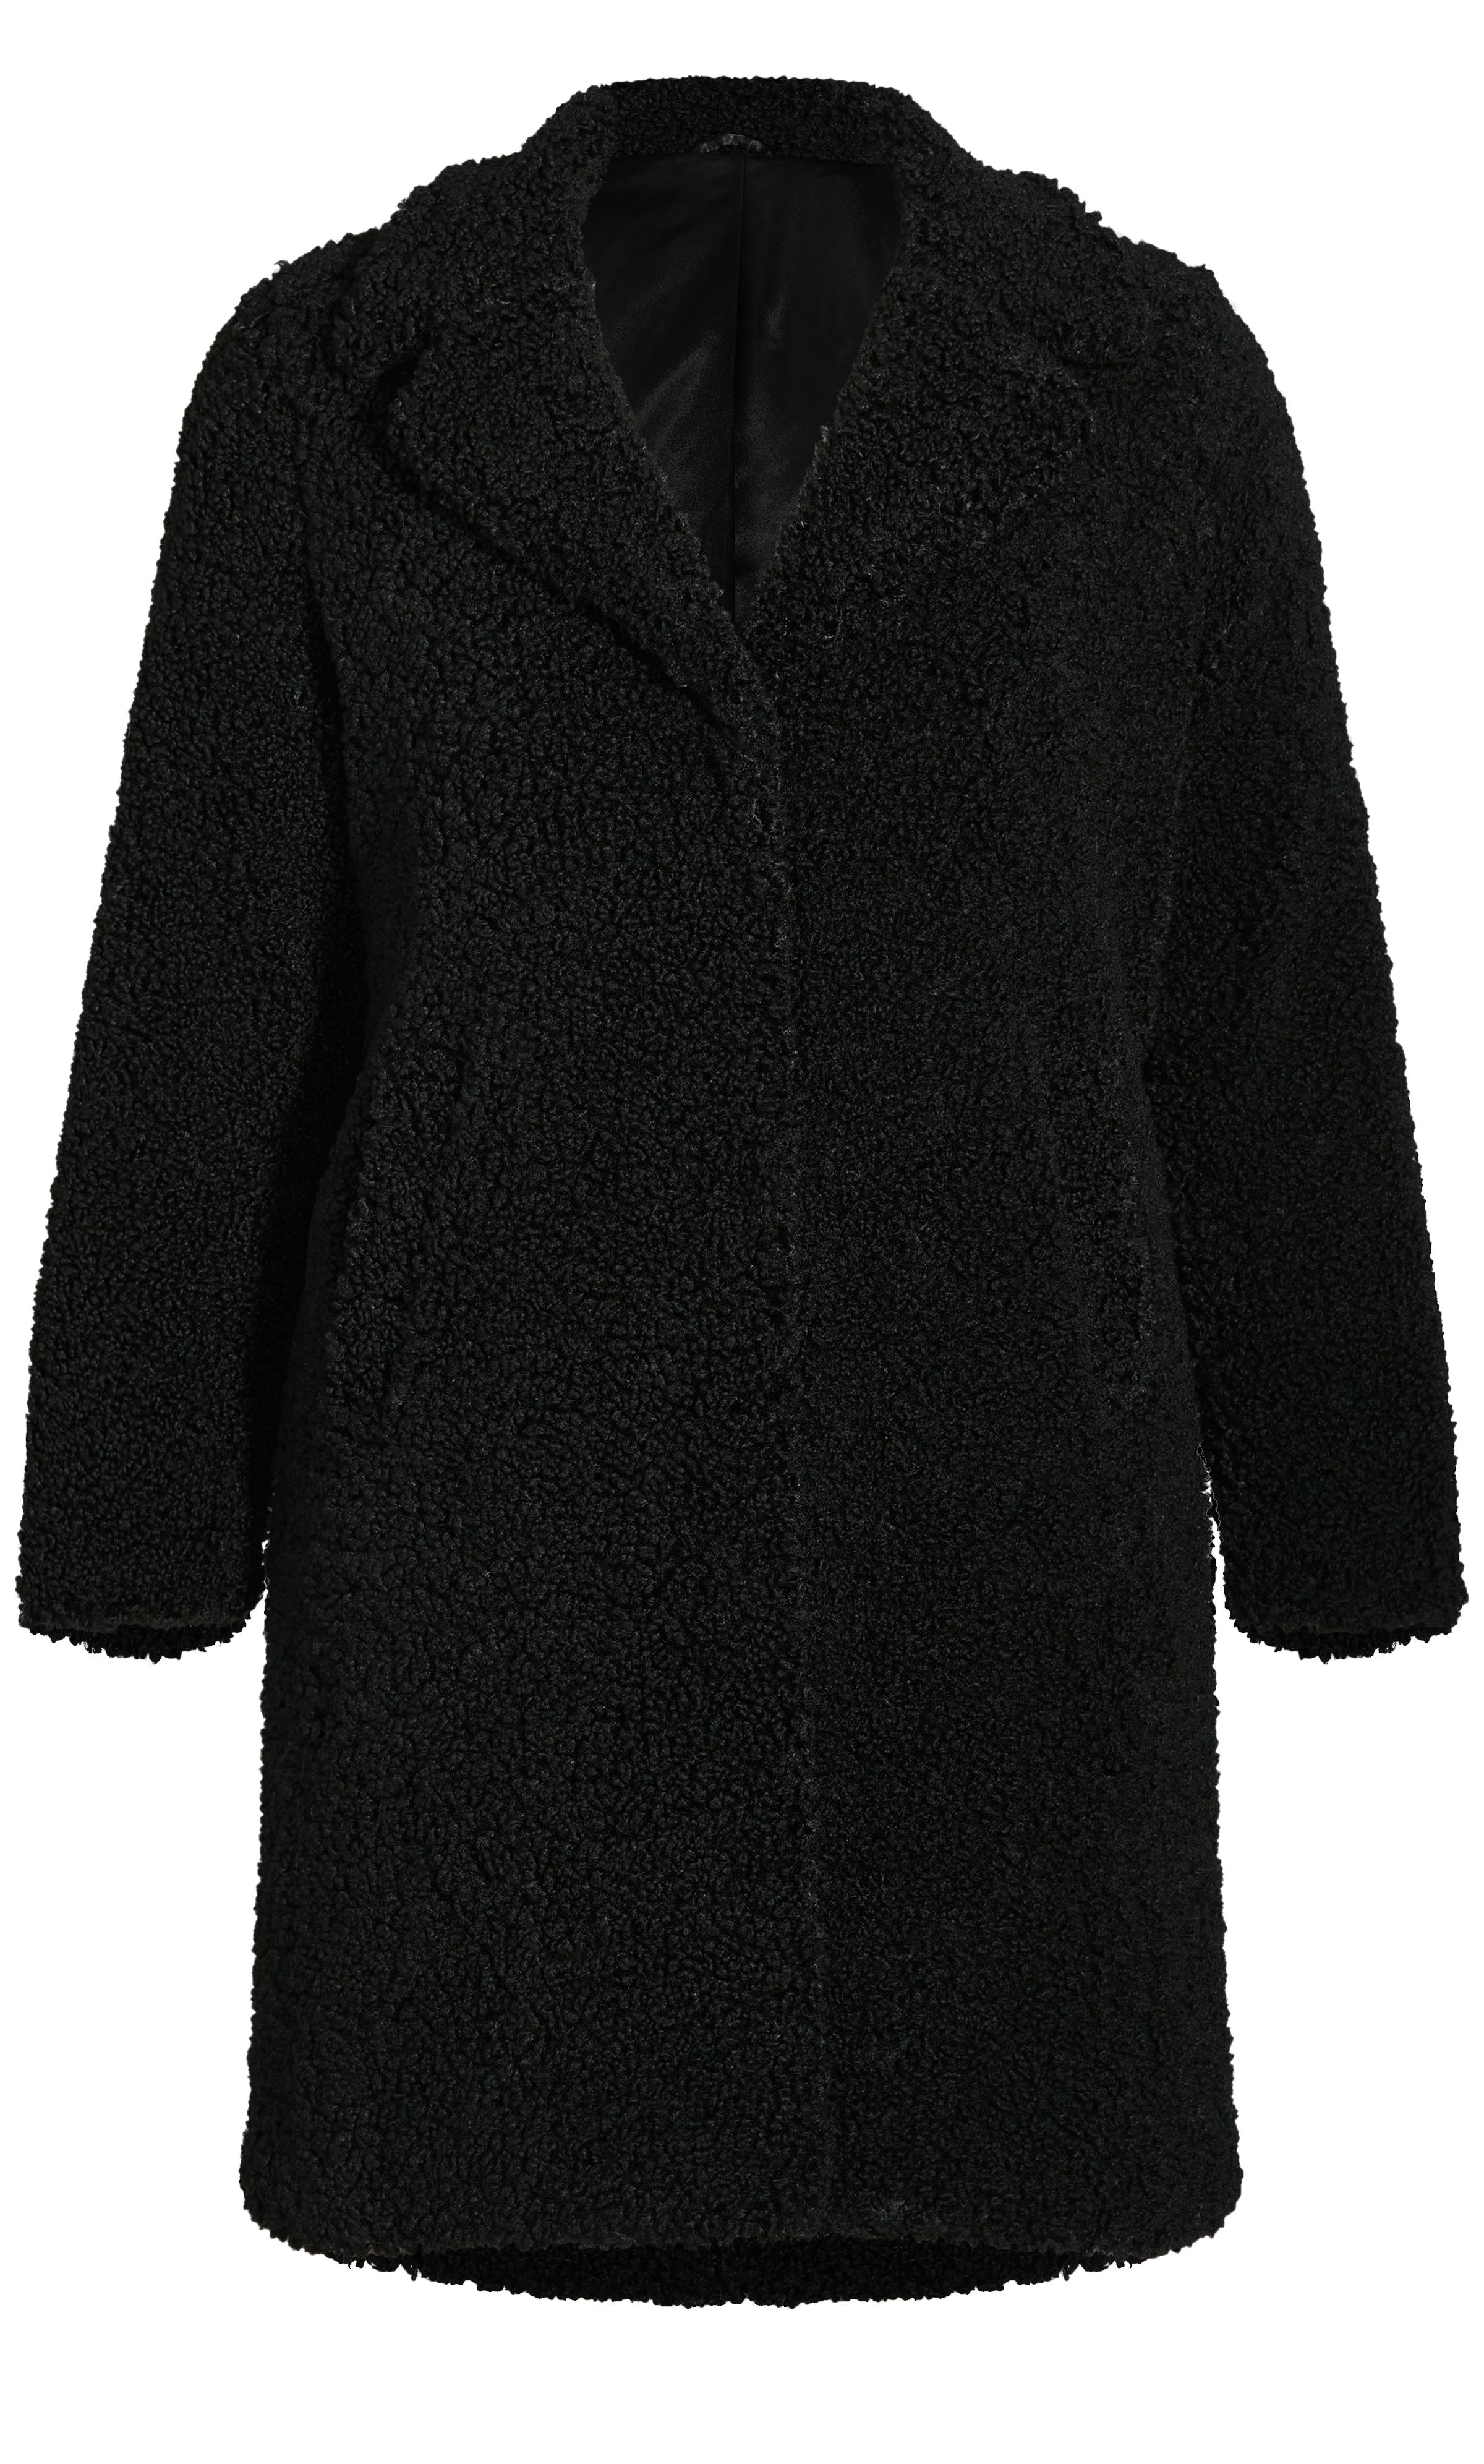 Rock the teddy coat trend this season in our utterly chic and fashion-forward Teddy Coat! The fluffy fabrication adds texture and style to your outfit, while a sleek black hue keeps this coat easy to style with from day-to-day. Key Features Include: - Collared neckline - Long sleeves - Fluffy faux fur fabrication - Snap button down front - Fully satin lined - Longline length Opt for a killer street style vibe by layering this coat over a slogan tee, ripped skinny jeans and chunky combat boots.